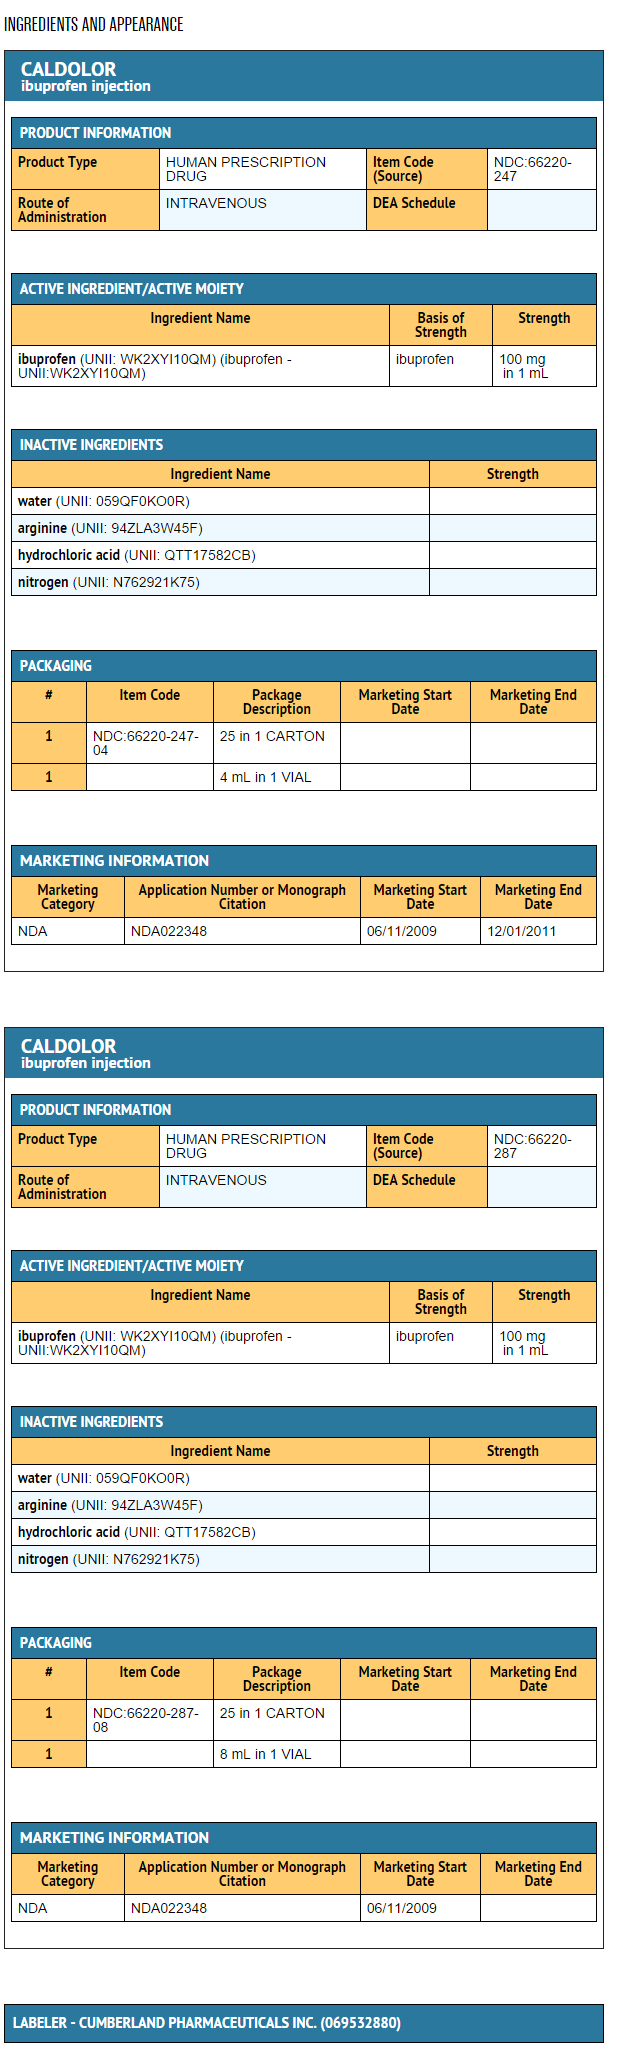 File:Caldolor iv ingredients and appearance.png